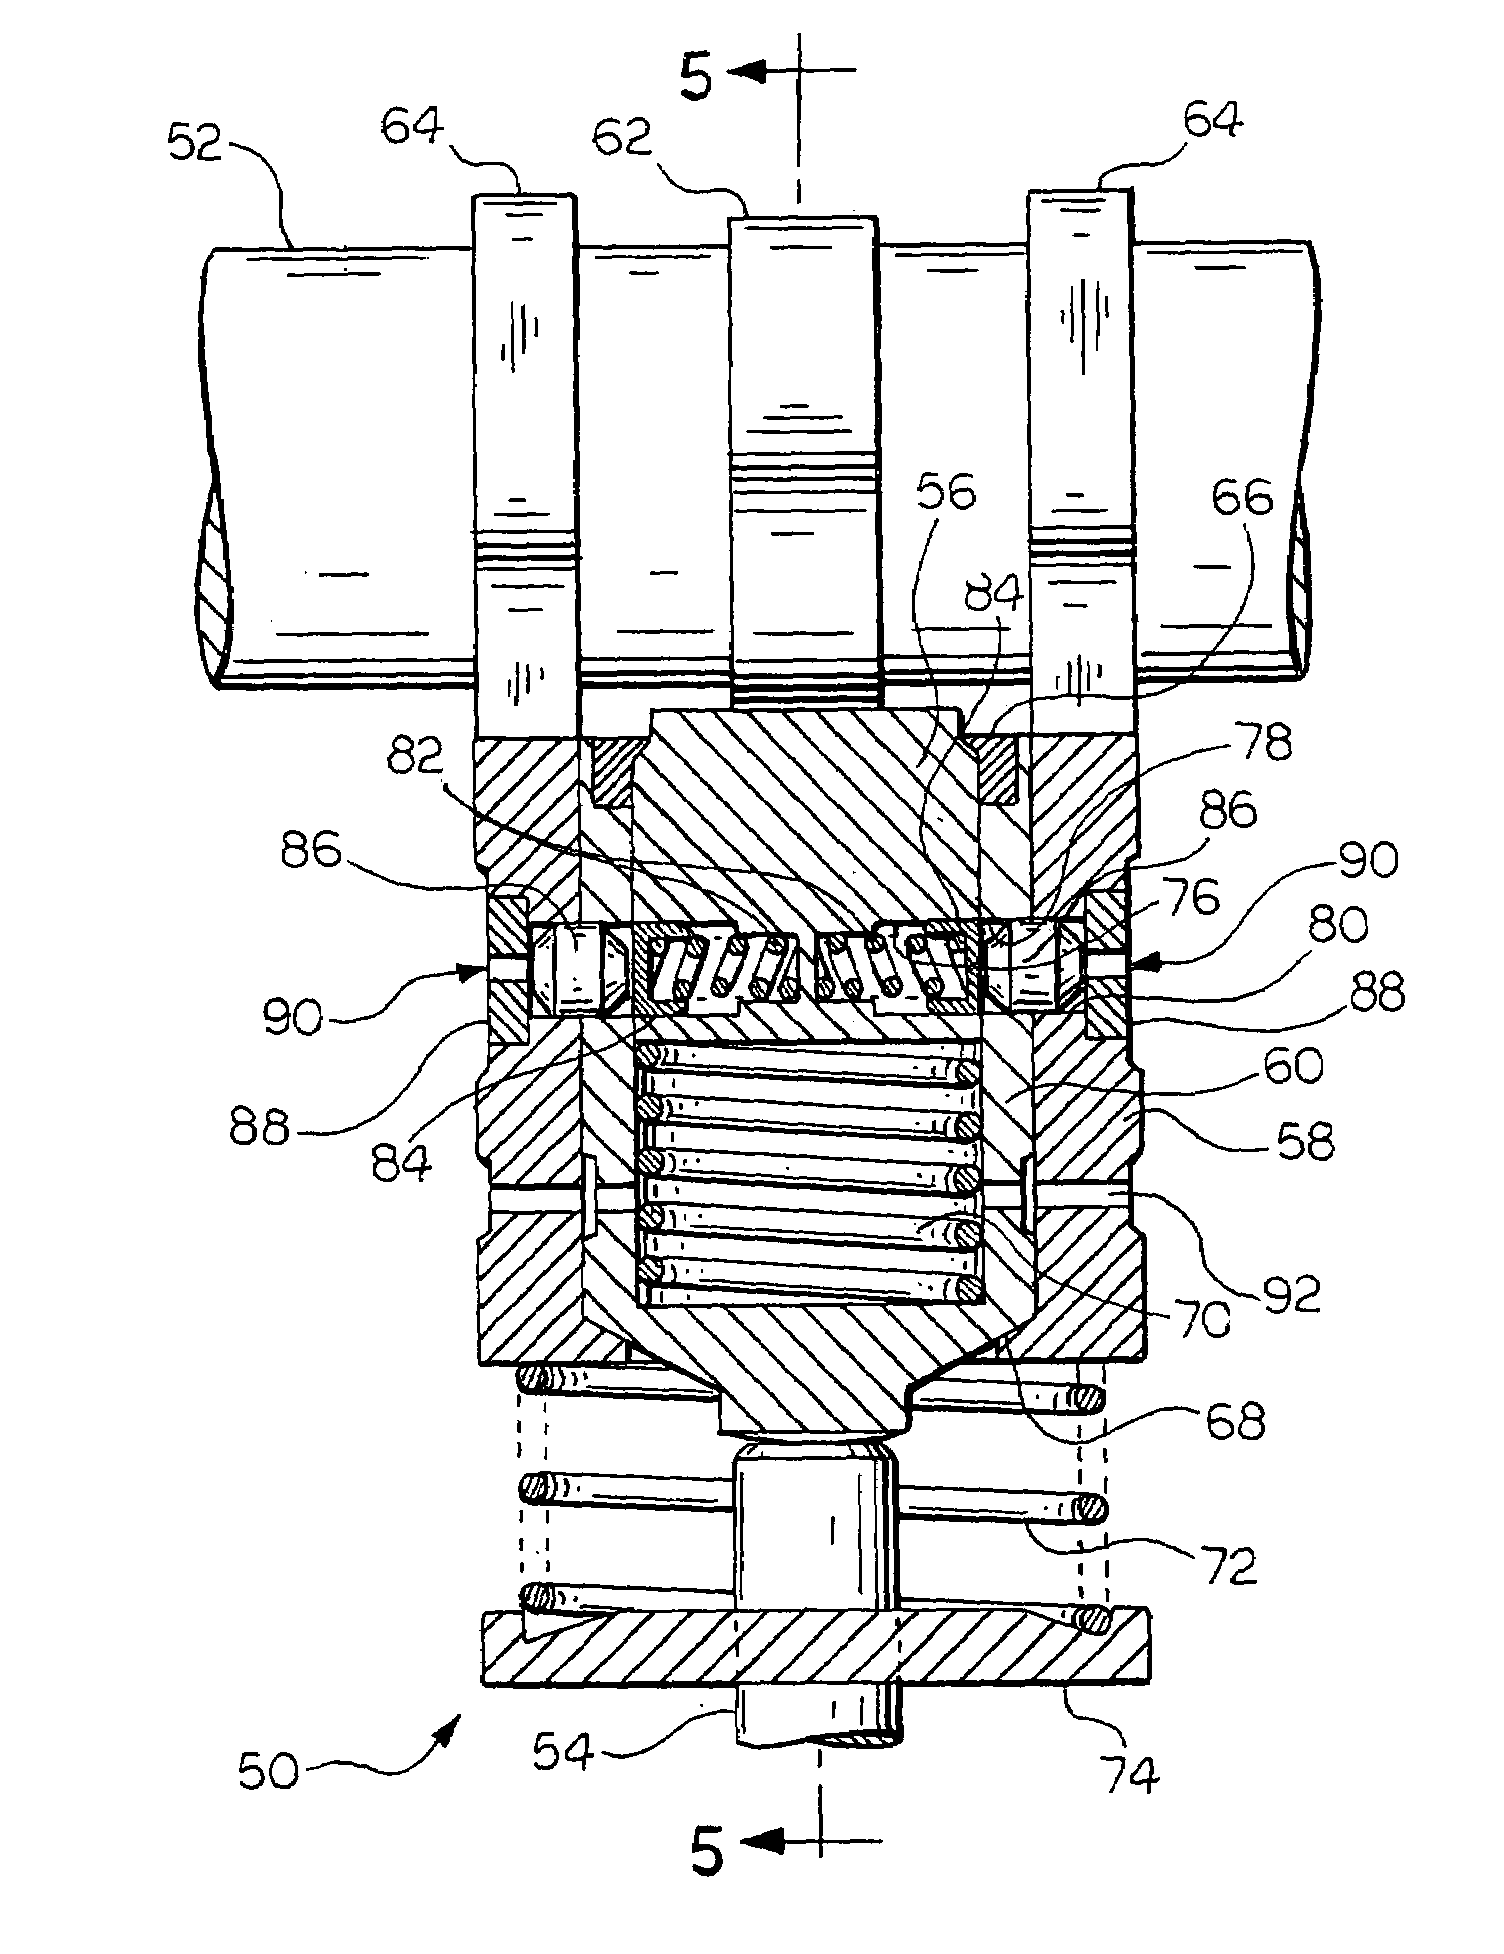 Two-stroke and four-stroke switching mechanism